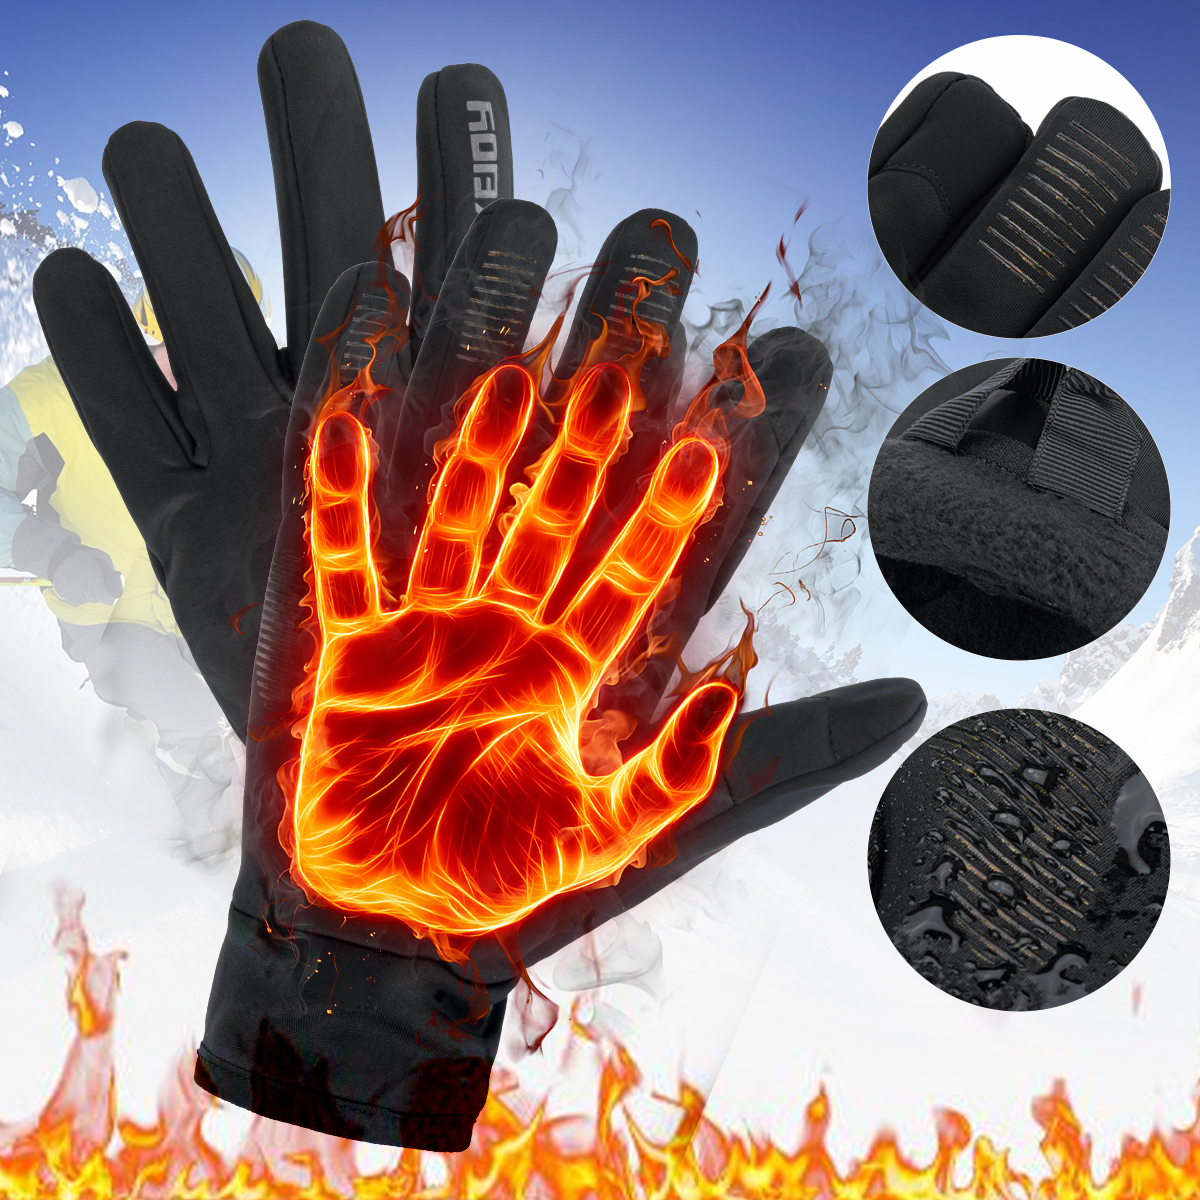 Winter-Warm-Thermal-Gloves-Skiing-Snow-Snowboard-Cycling-Touchscreen-Waterproof-Windproof-Gloves-1613607-7